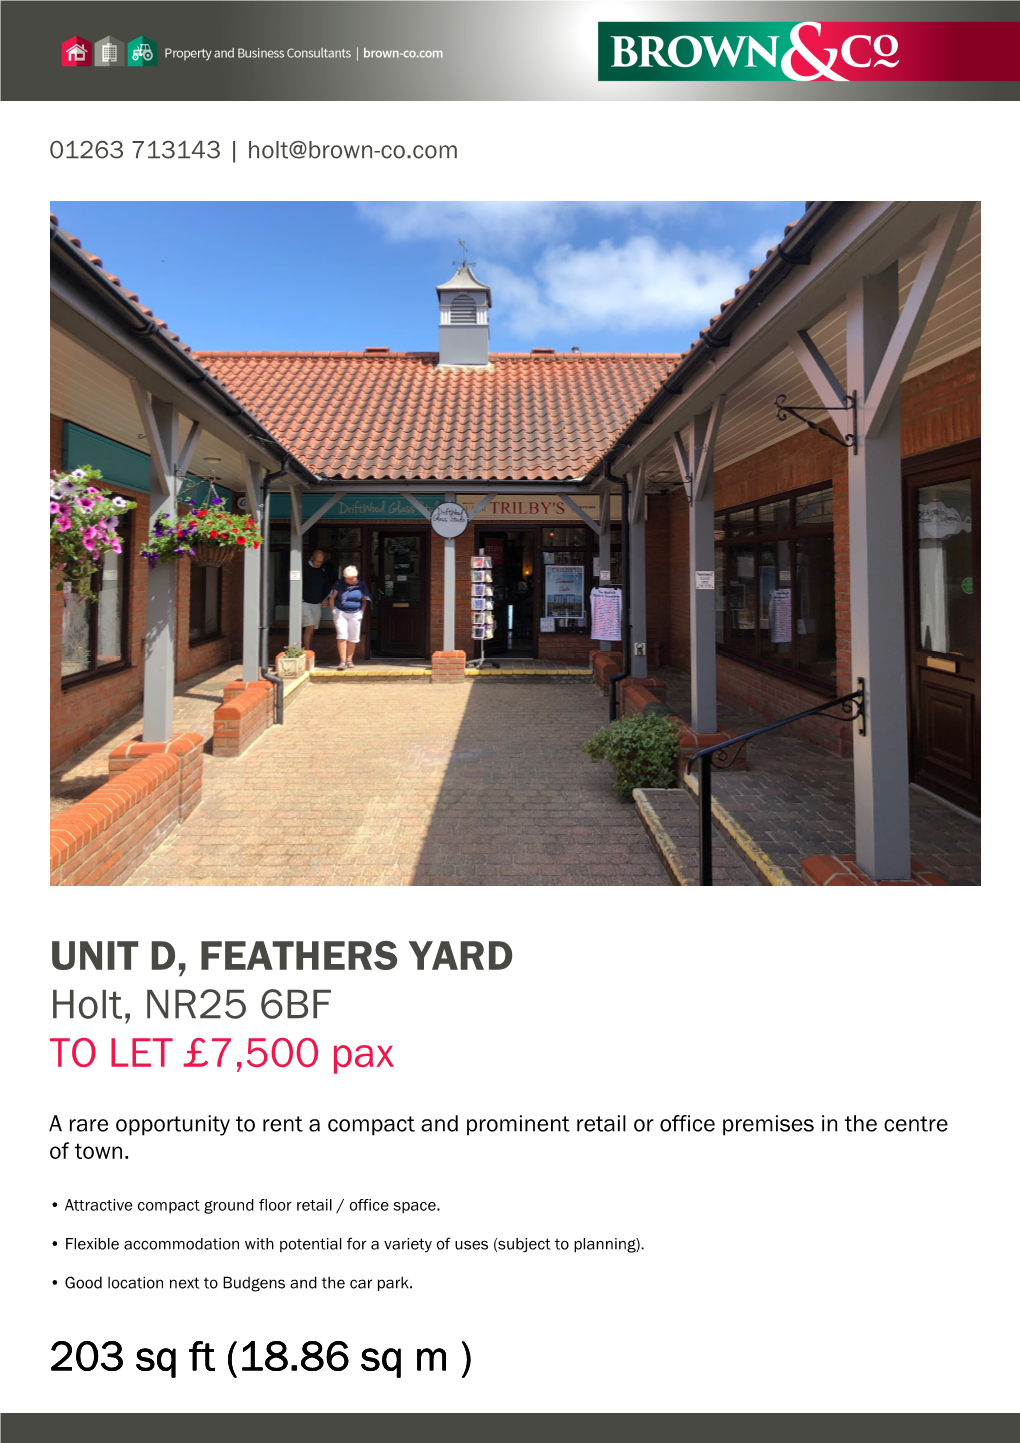 UNIT D, FEATHERS YARD Holt, NR25 6BF to LET £7,500 Pax